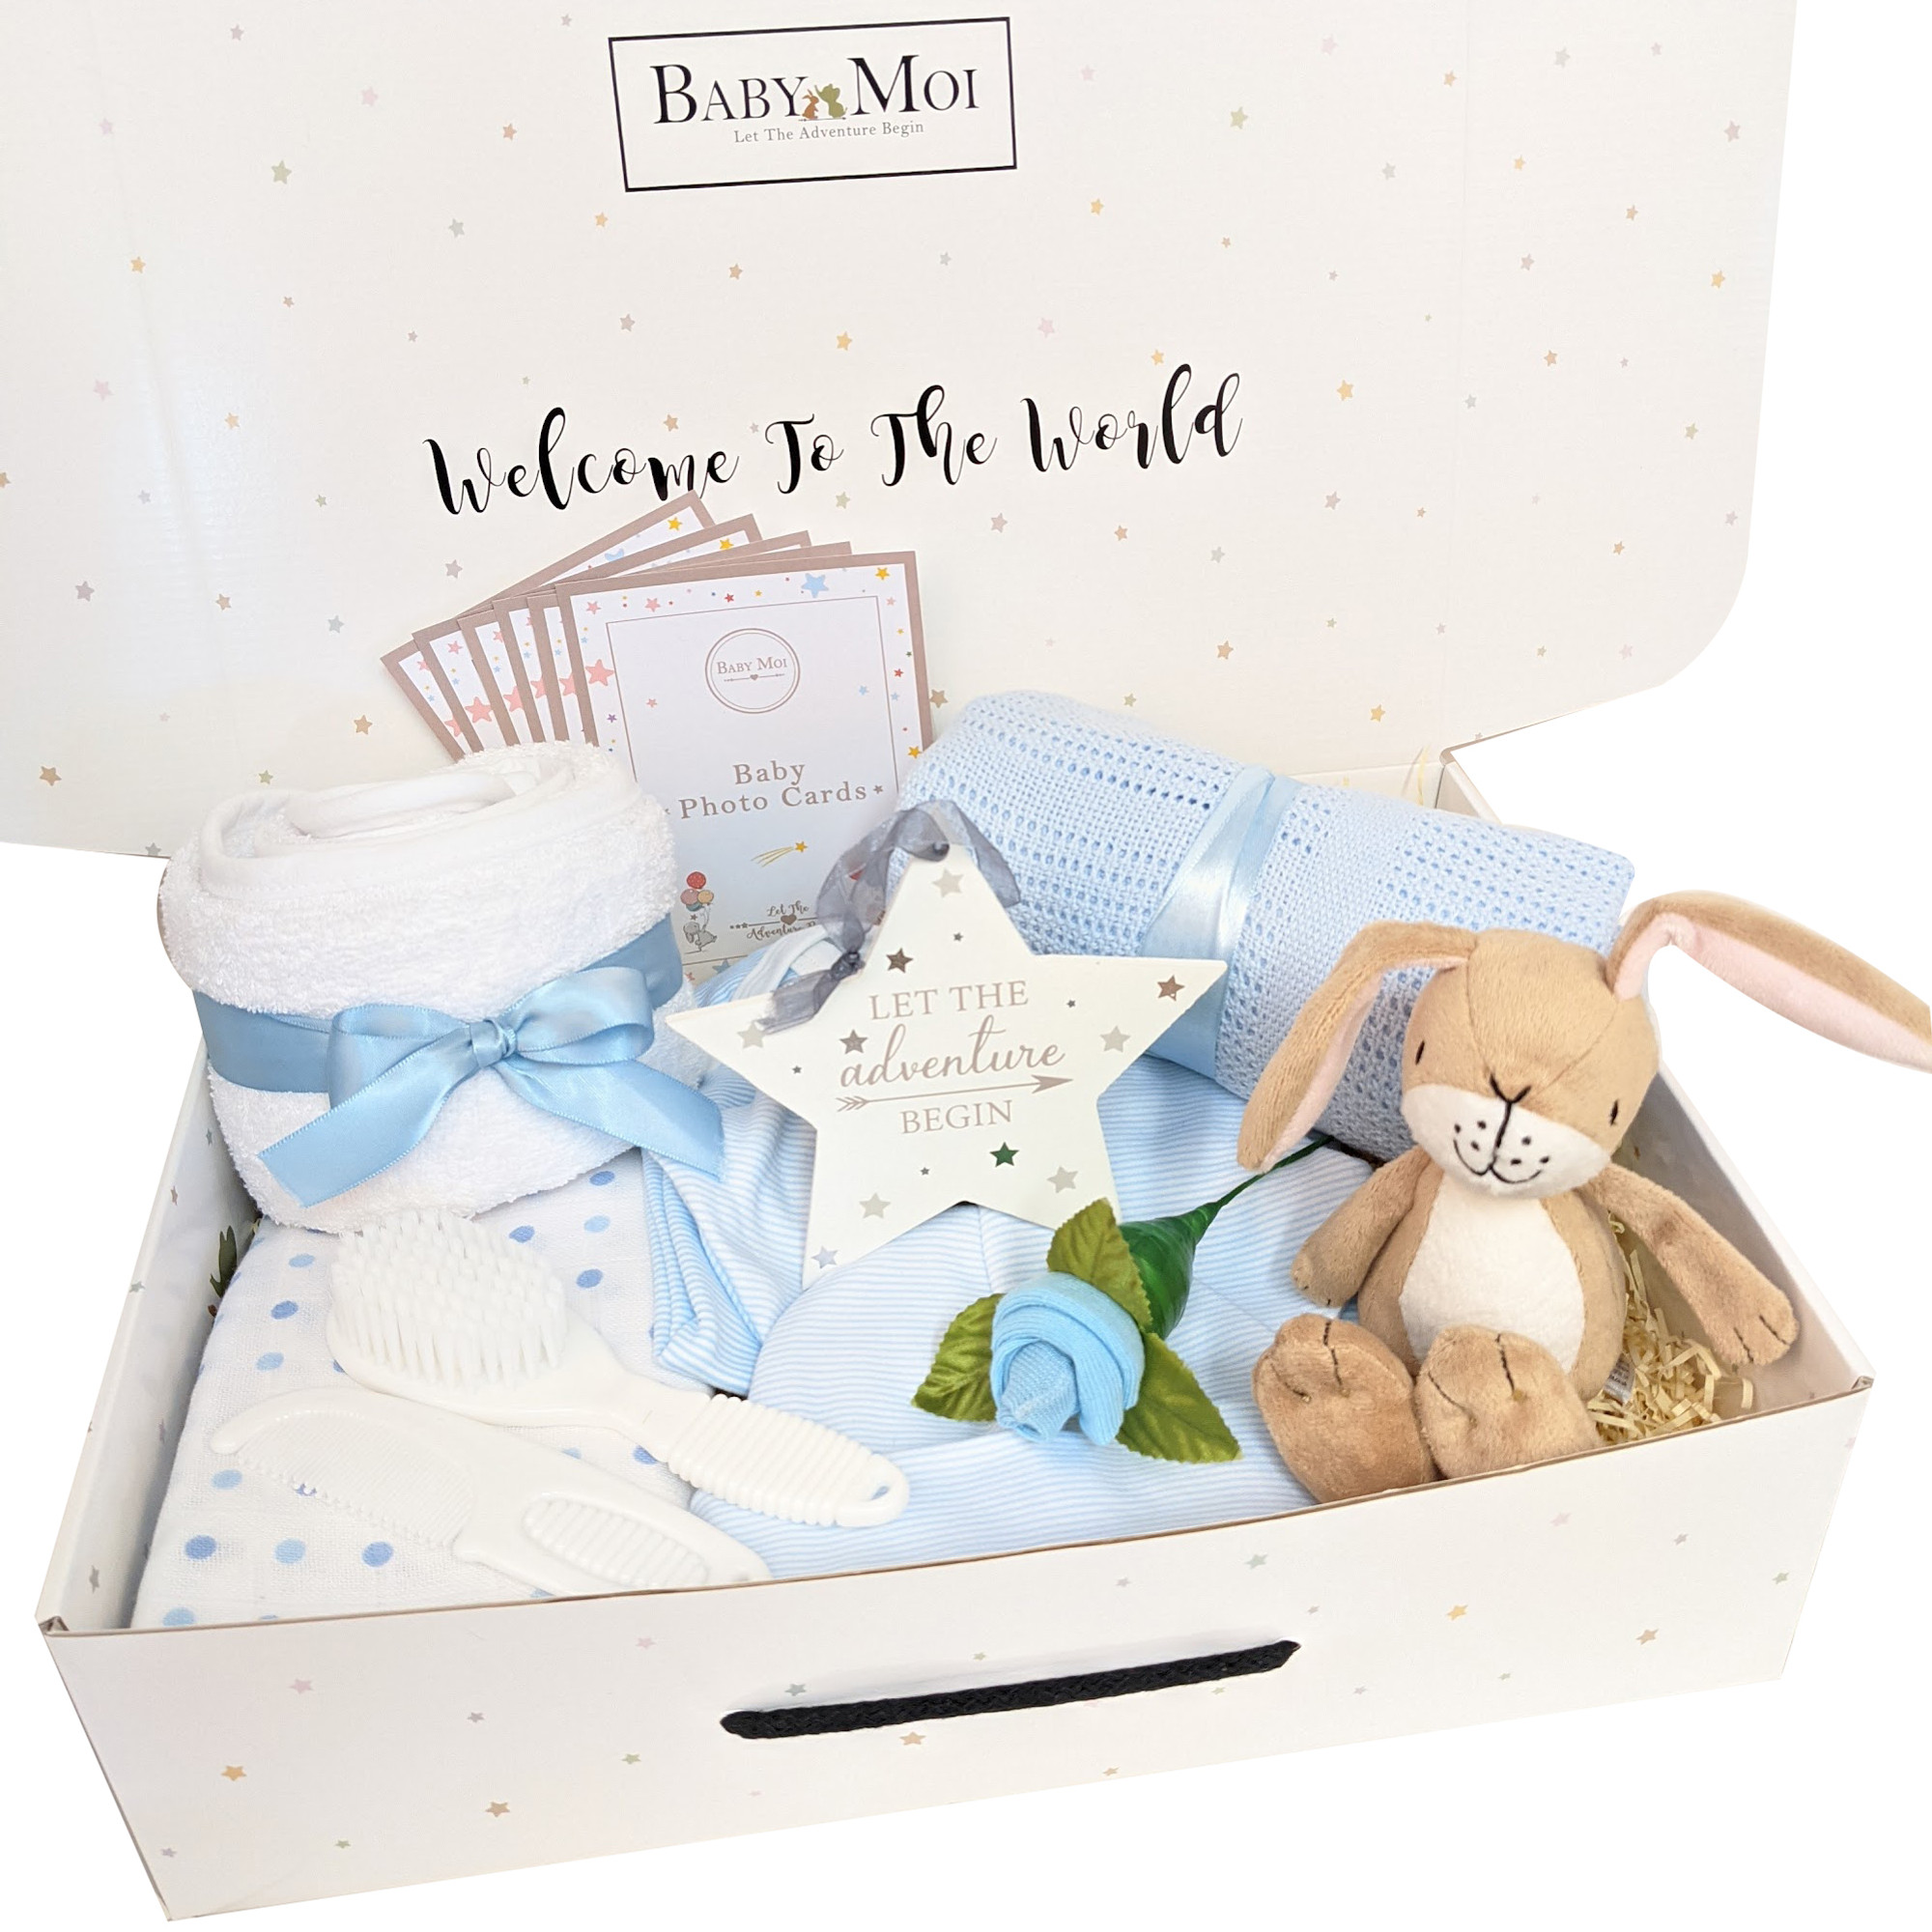 WELCOME TO THE WORLD BABY BOY GIFT HAMPER (GMILY HARE)